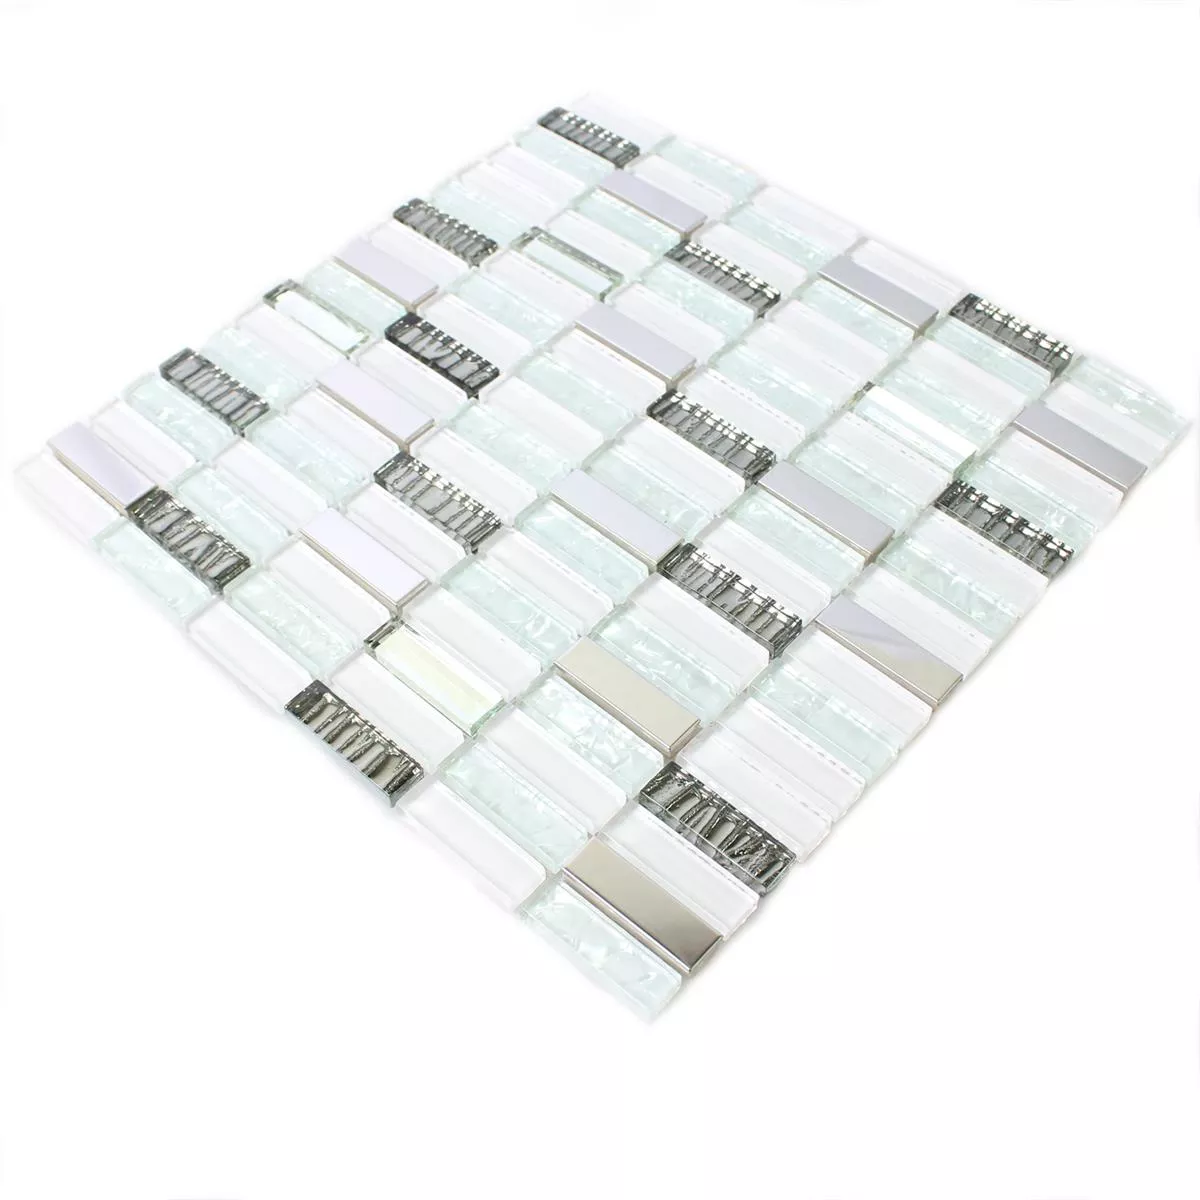 Mosaic Tiles Glass Stainless Steel White Mix